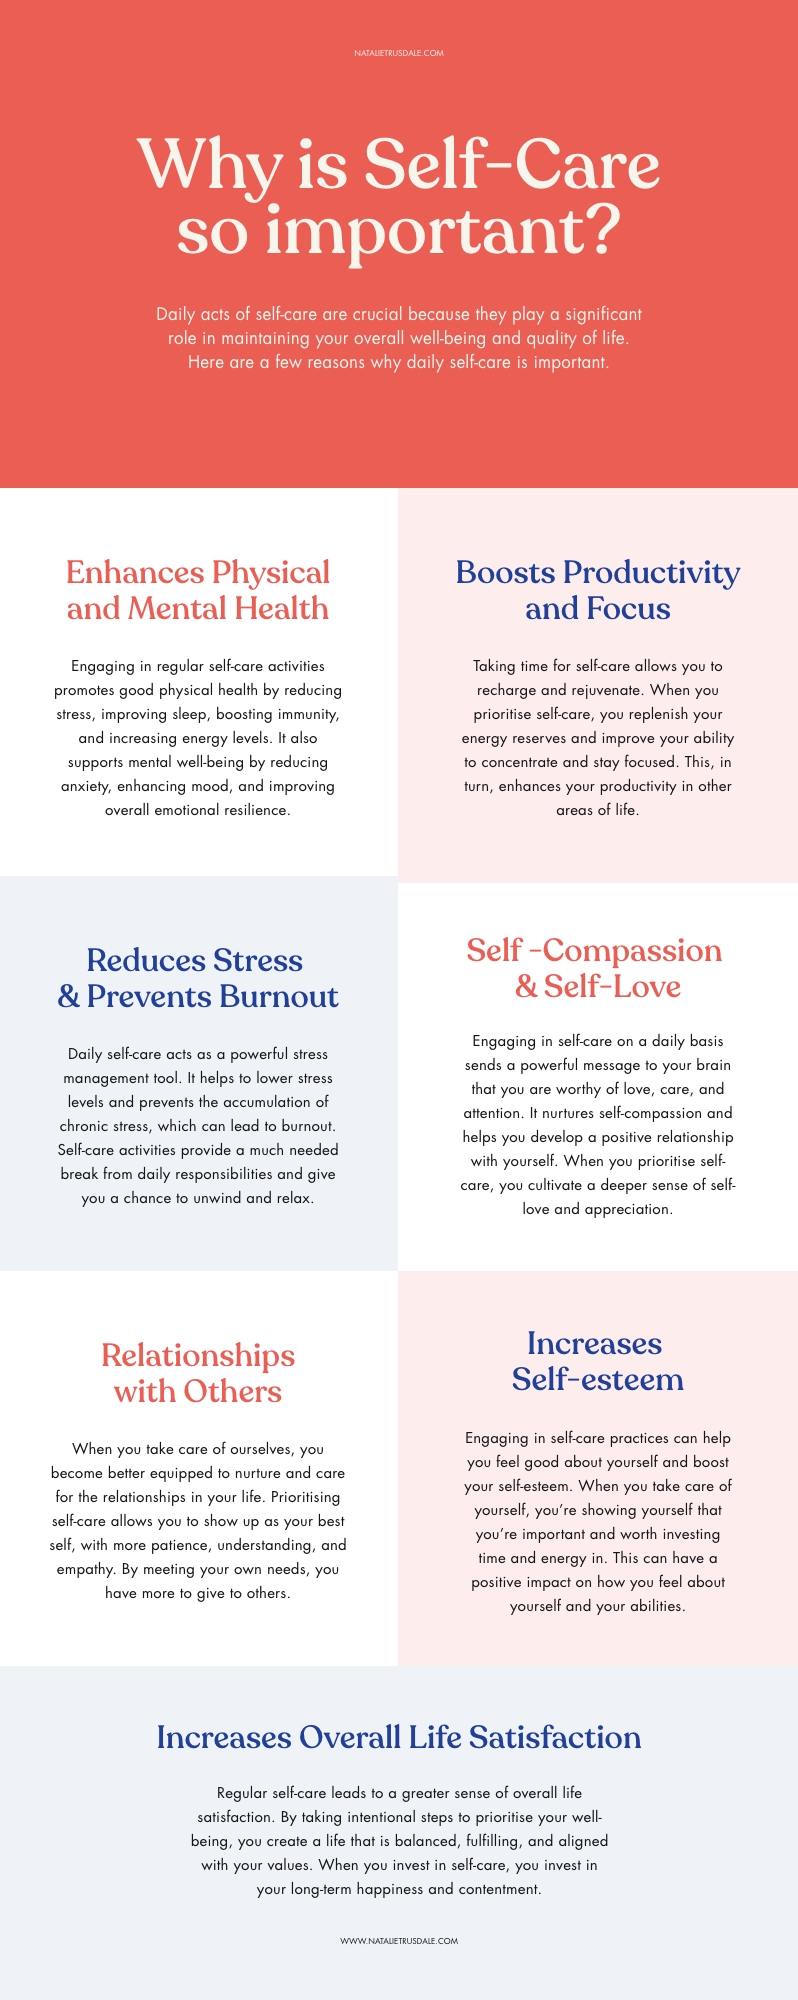 practising Self Care Reason Why Self-Care is so important infographic